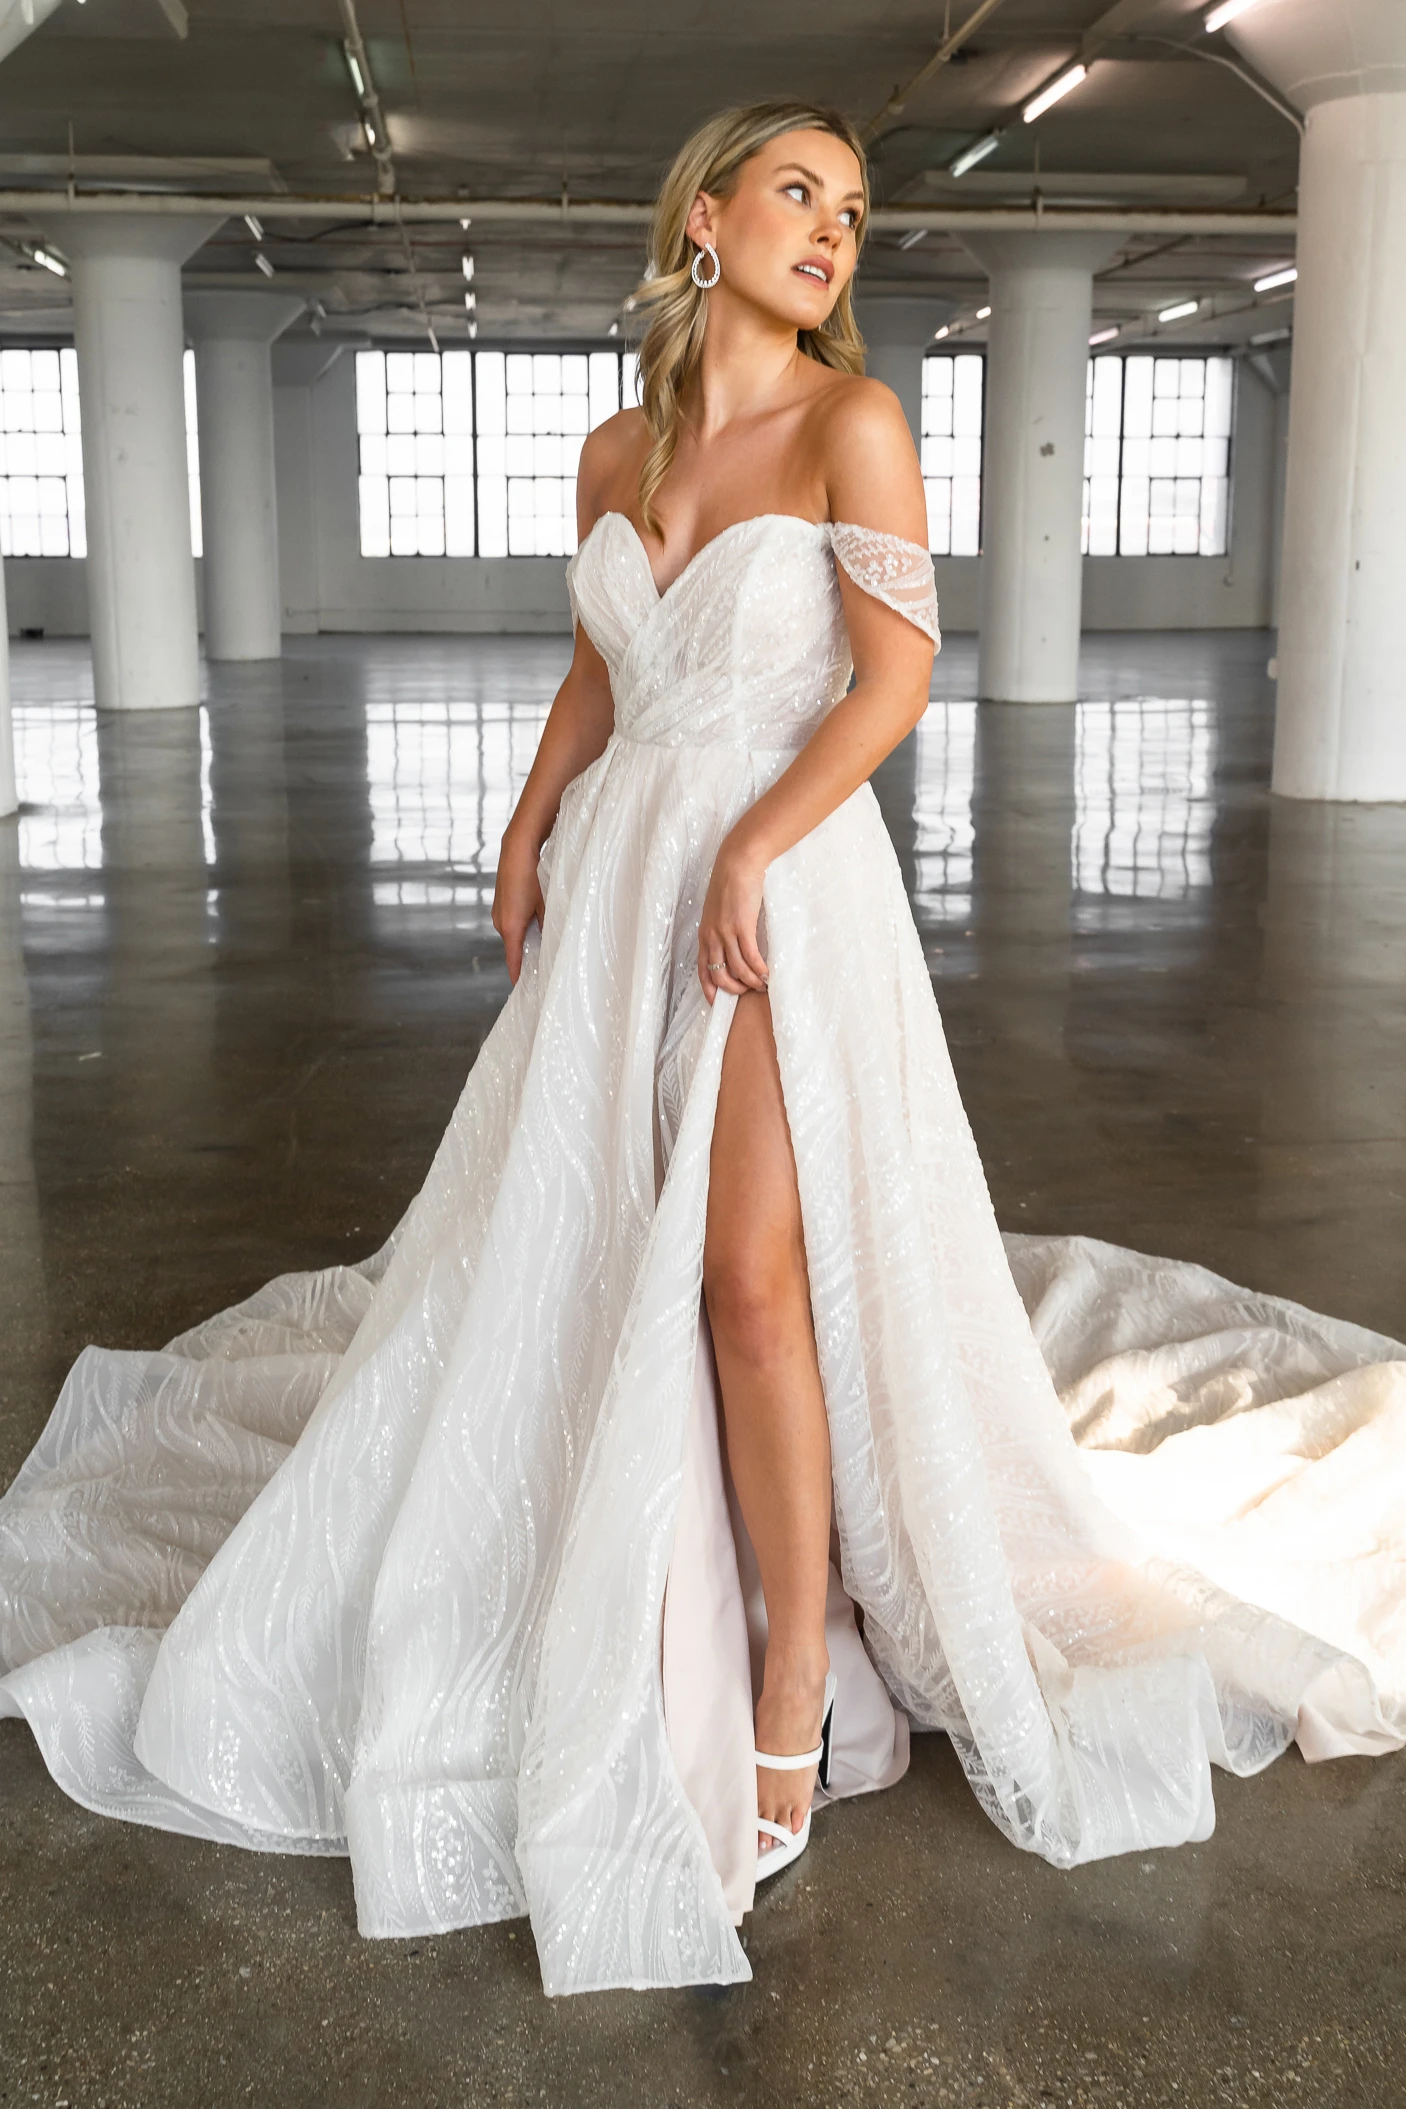 sparkling a-line wedding dress with slit and off the shoulder straps - D3648 by Essense of Australia